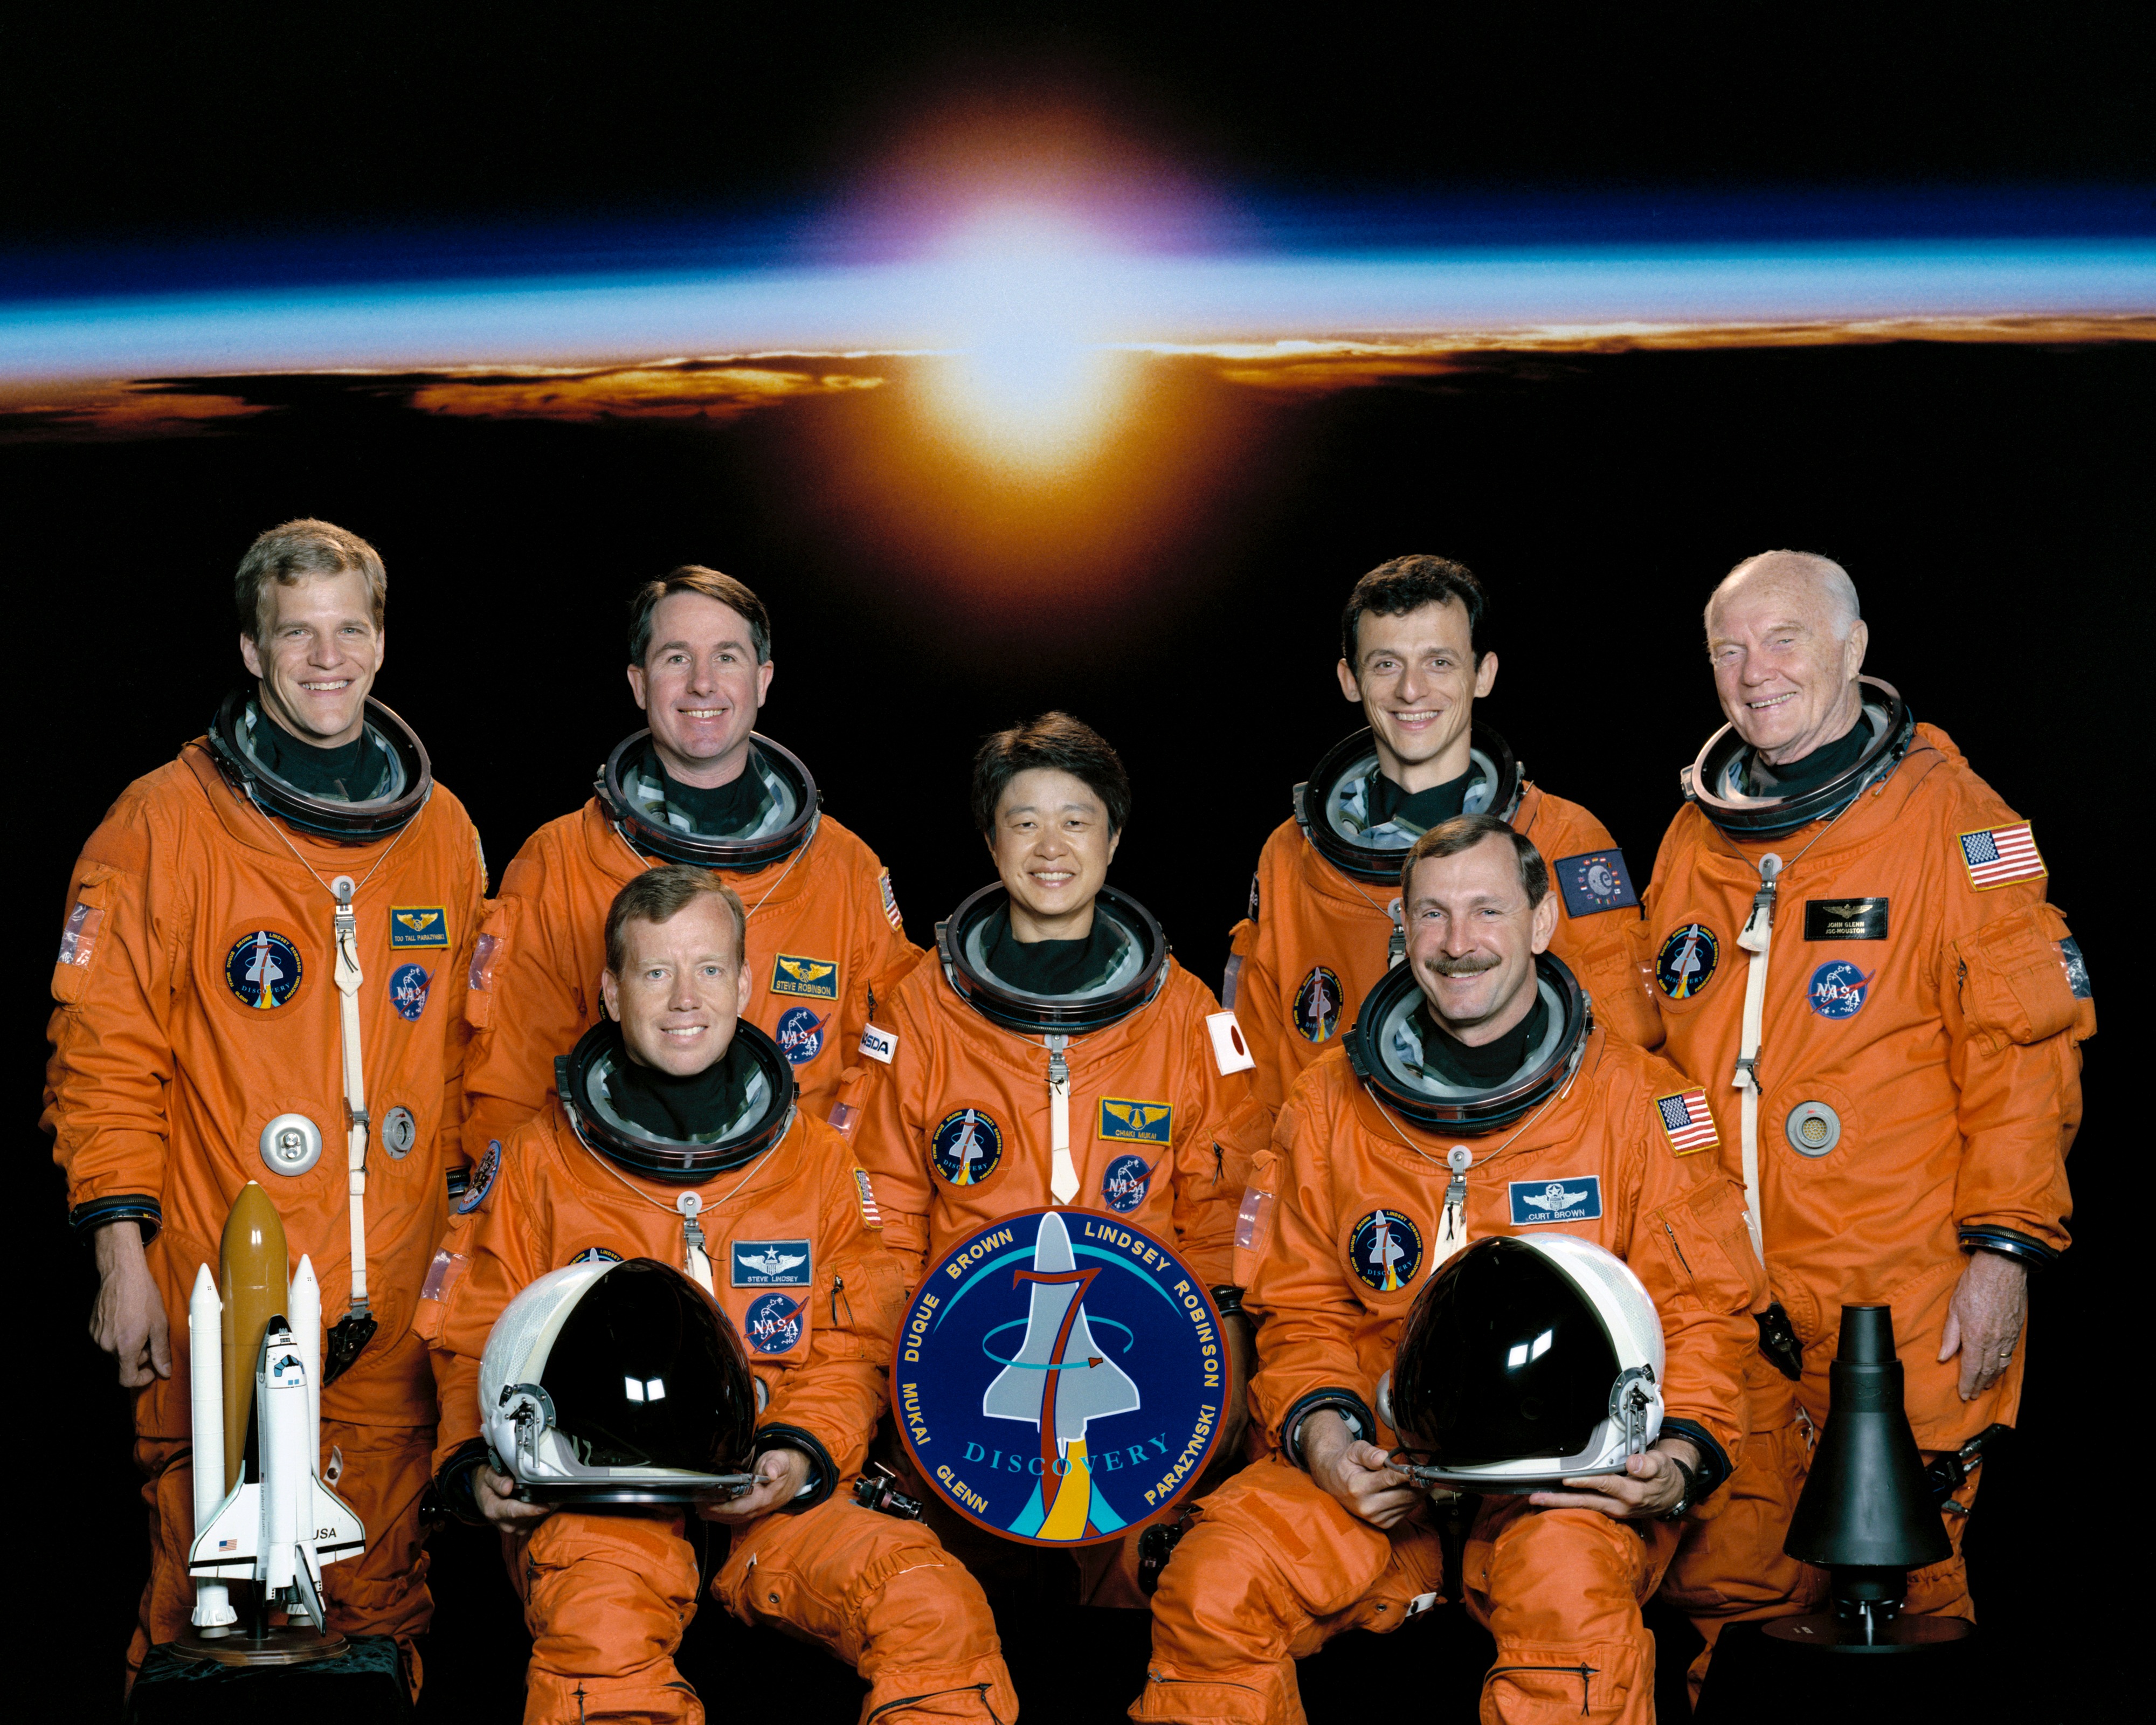 STS-95 astronauts Steven W. Lindsey, seated left, and Curtis L. Brown; Scott E. Parazynski, standing left, Stephen K. Robinson, Chiaki Mukai of the National Space Development Agency of Japan, now the Japan Aerospace Exploration Agency, Pedro F. Duque of the European Space Agency, and John H. Glenn